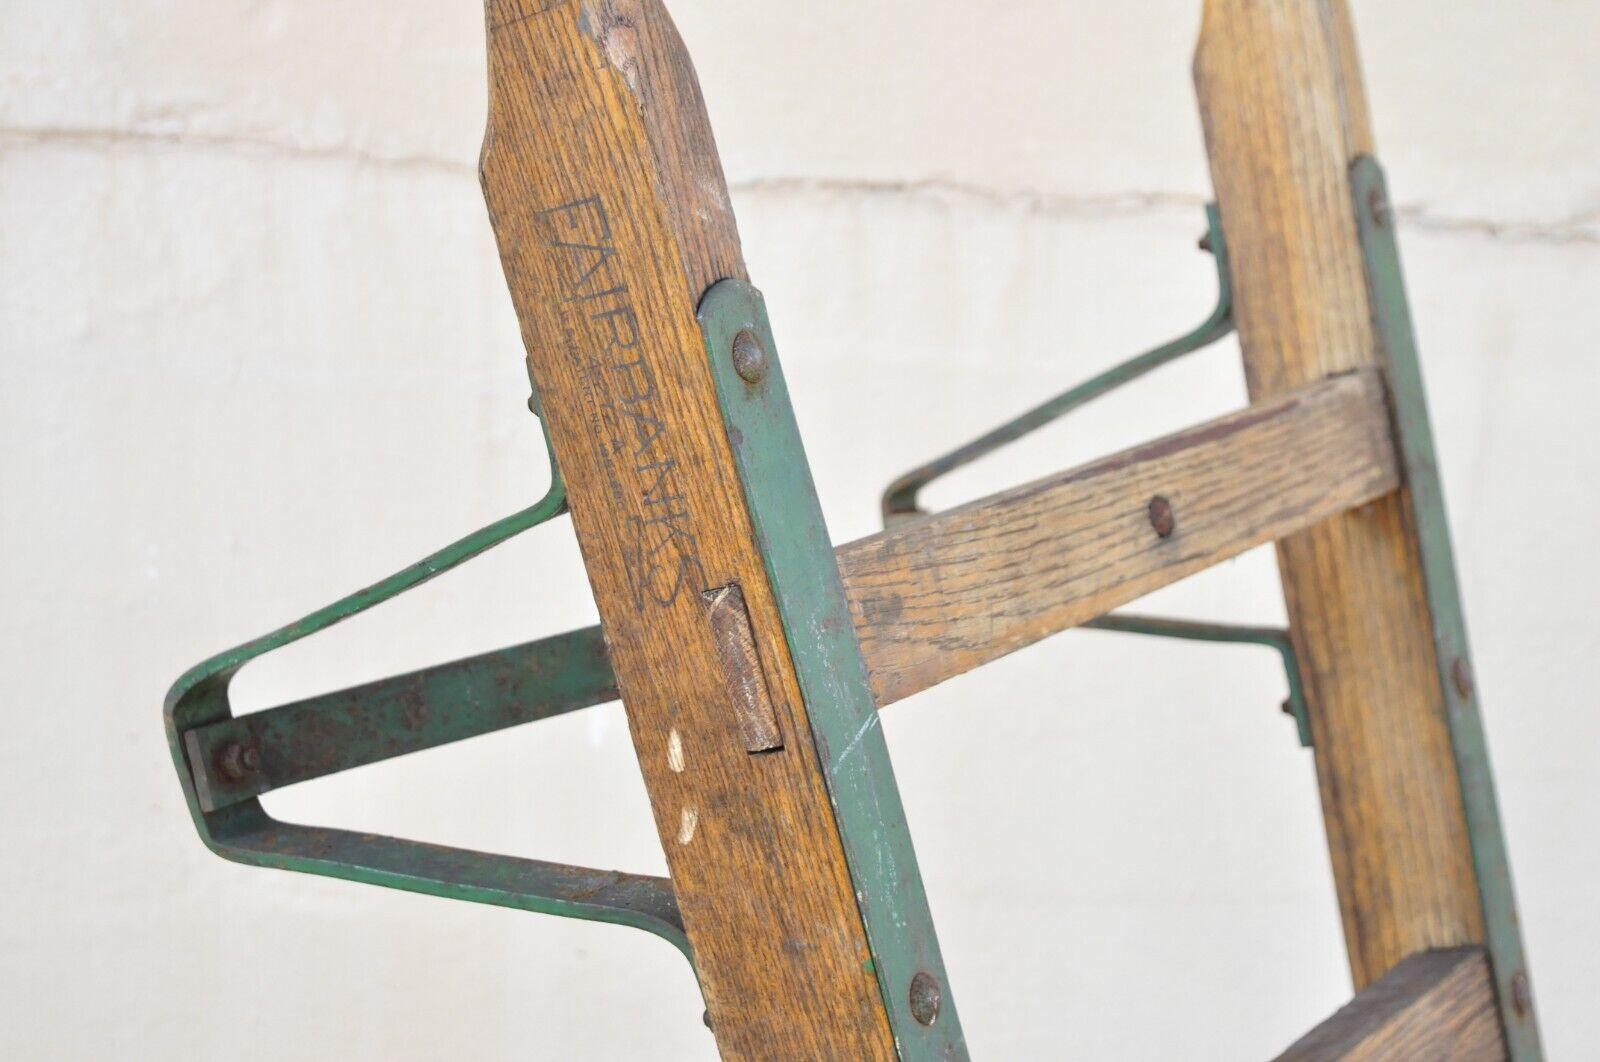 20th Century Antique American Industrial Oak Wood and Metal Hand Cart Hand Truck Dolly